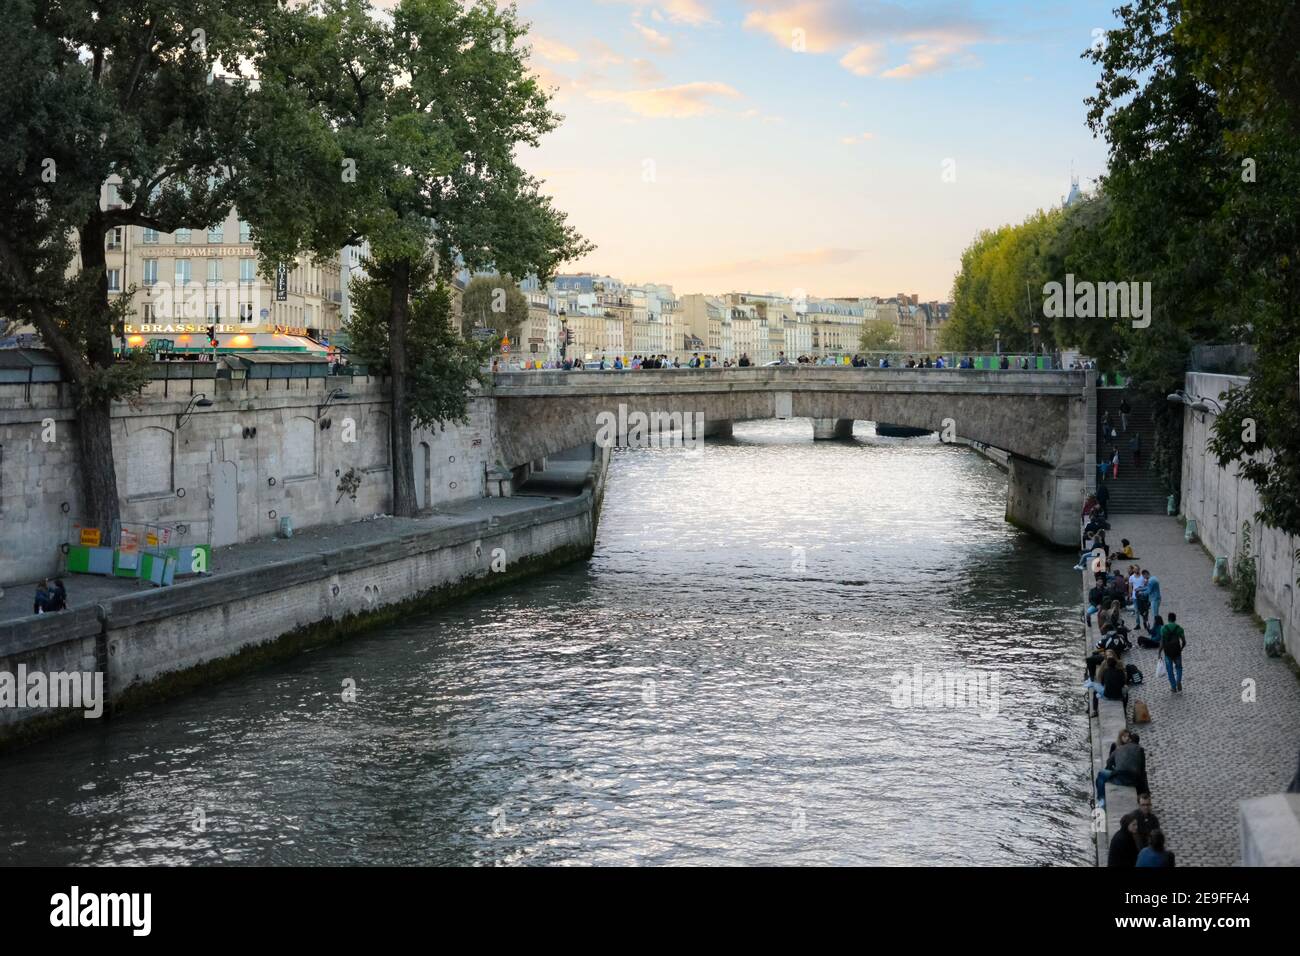 Local Parisians enjoy early evening strolling and relaxing on the banks of Seine river near the Ile de la Cite in Paris, France. Stock Photo